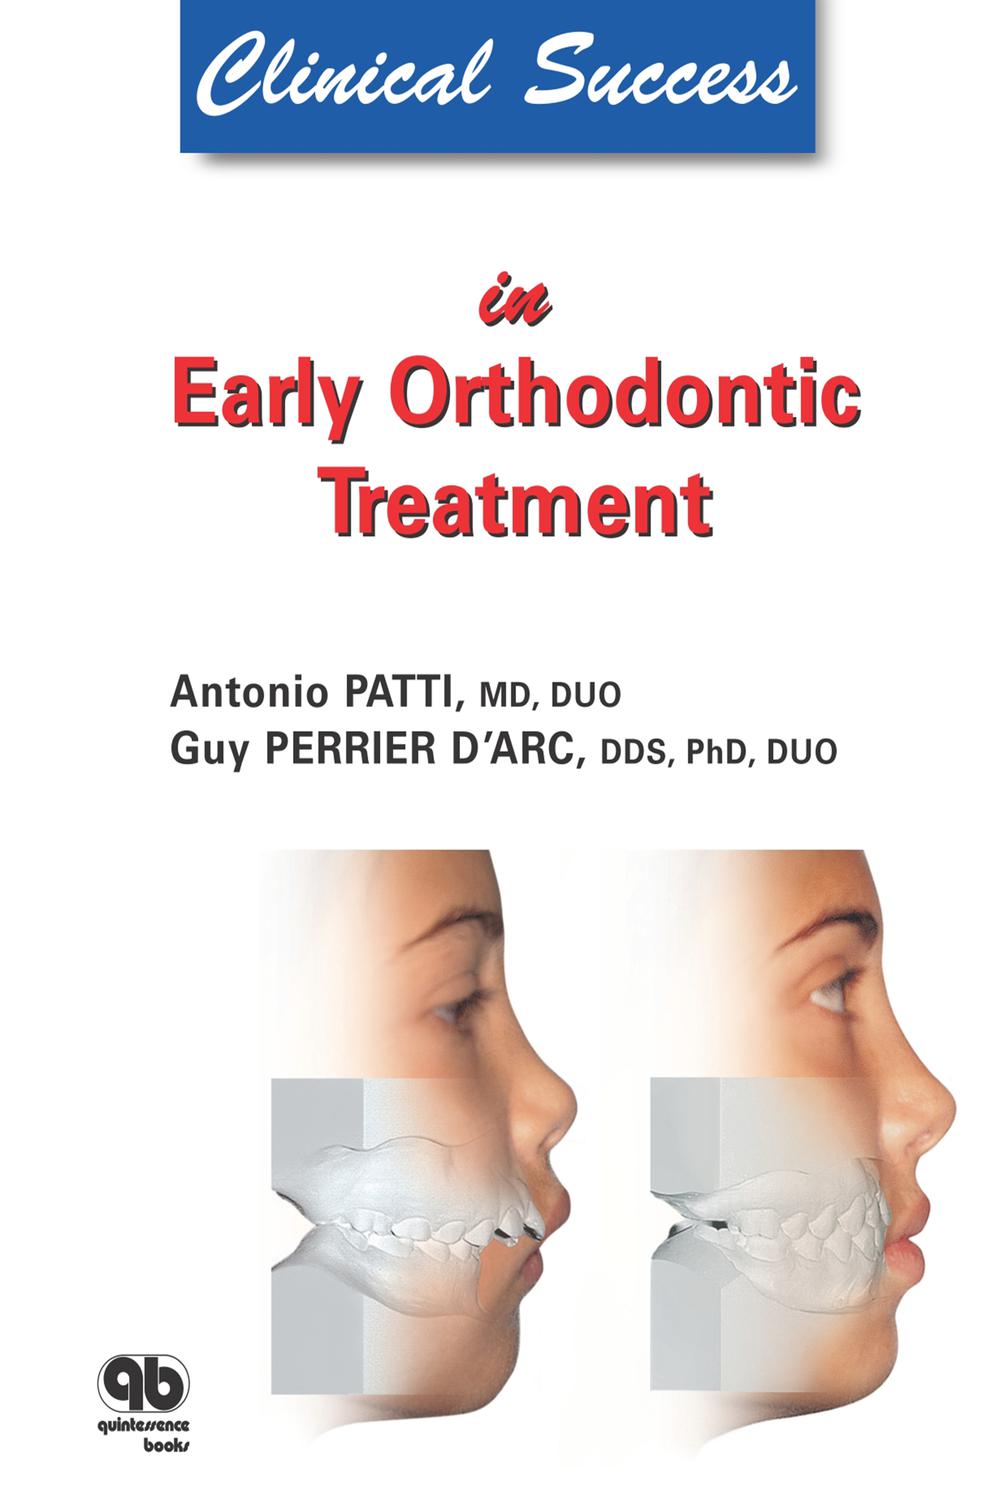 Clinical Success in Early Orthodontic Treatment - Antonio Patti, Guy Perrier D'Arc